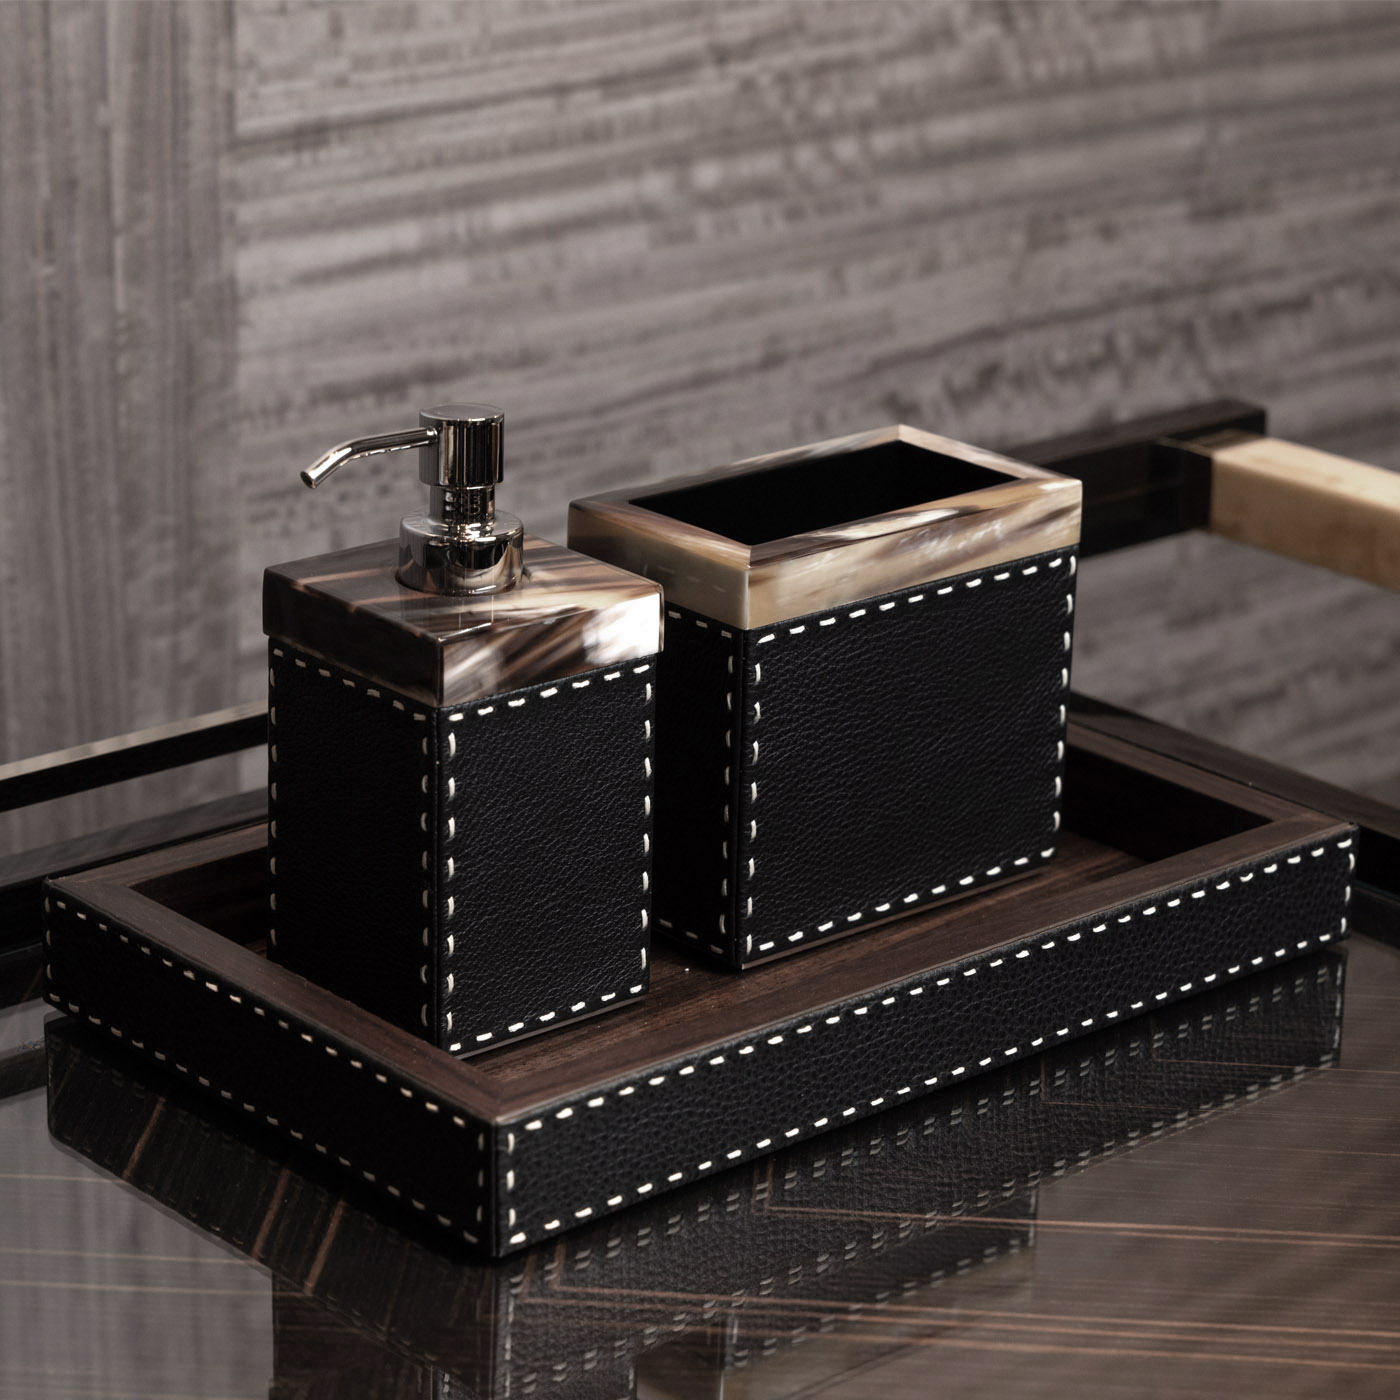 Bath sets - Berenice bath set in horn and Onyx colour leather - ambiance picture - Arcahorn